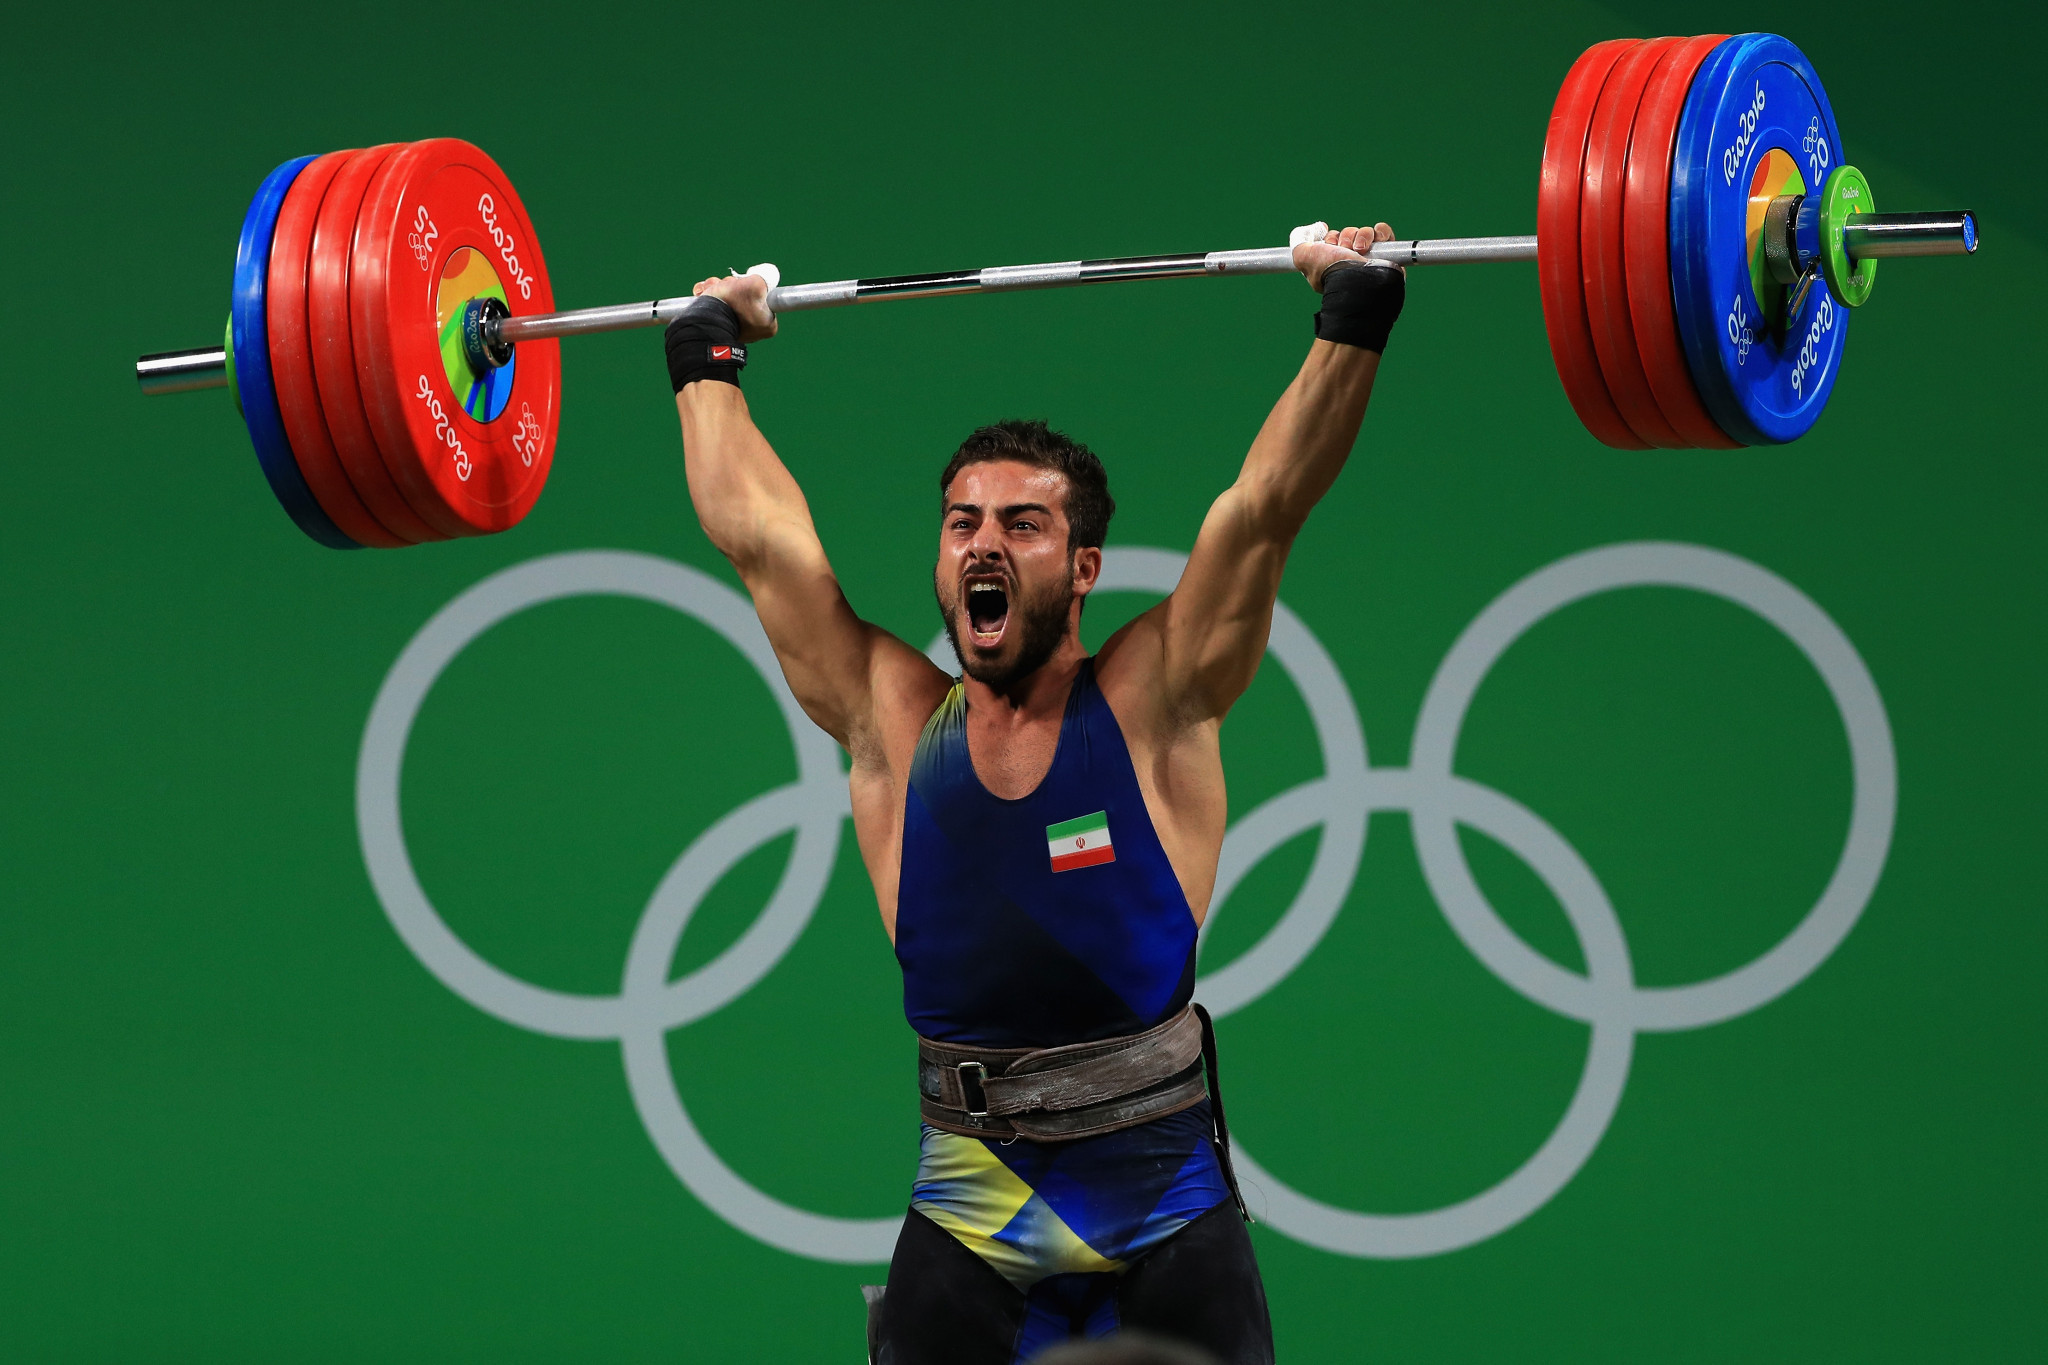 Kianoush Rostami had a poor showing at the Rajt Cup in Tehran, a qualifying event for the Tokyo 2020 Olympic Games © Getty Images